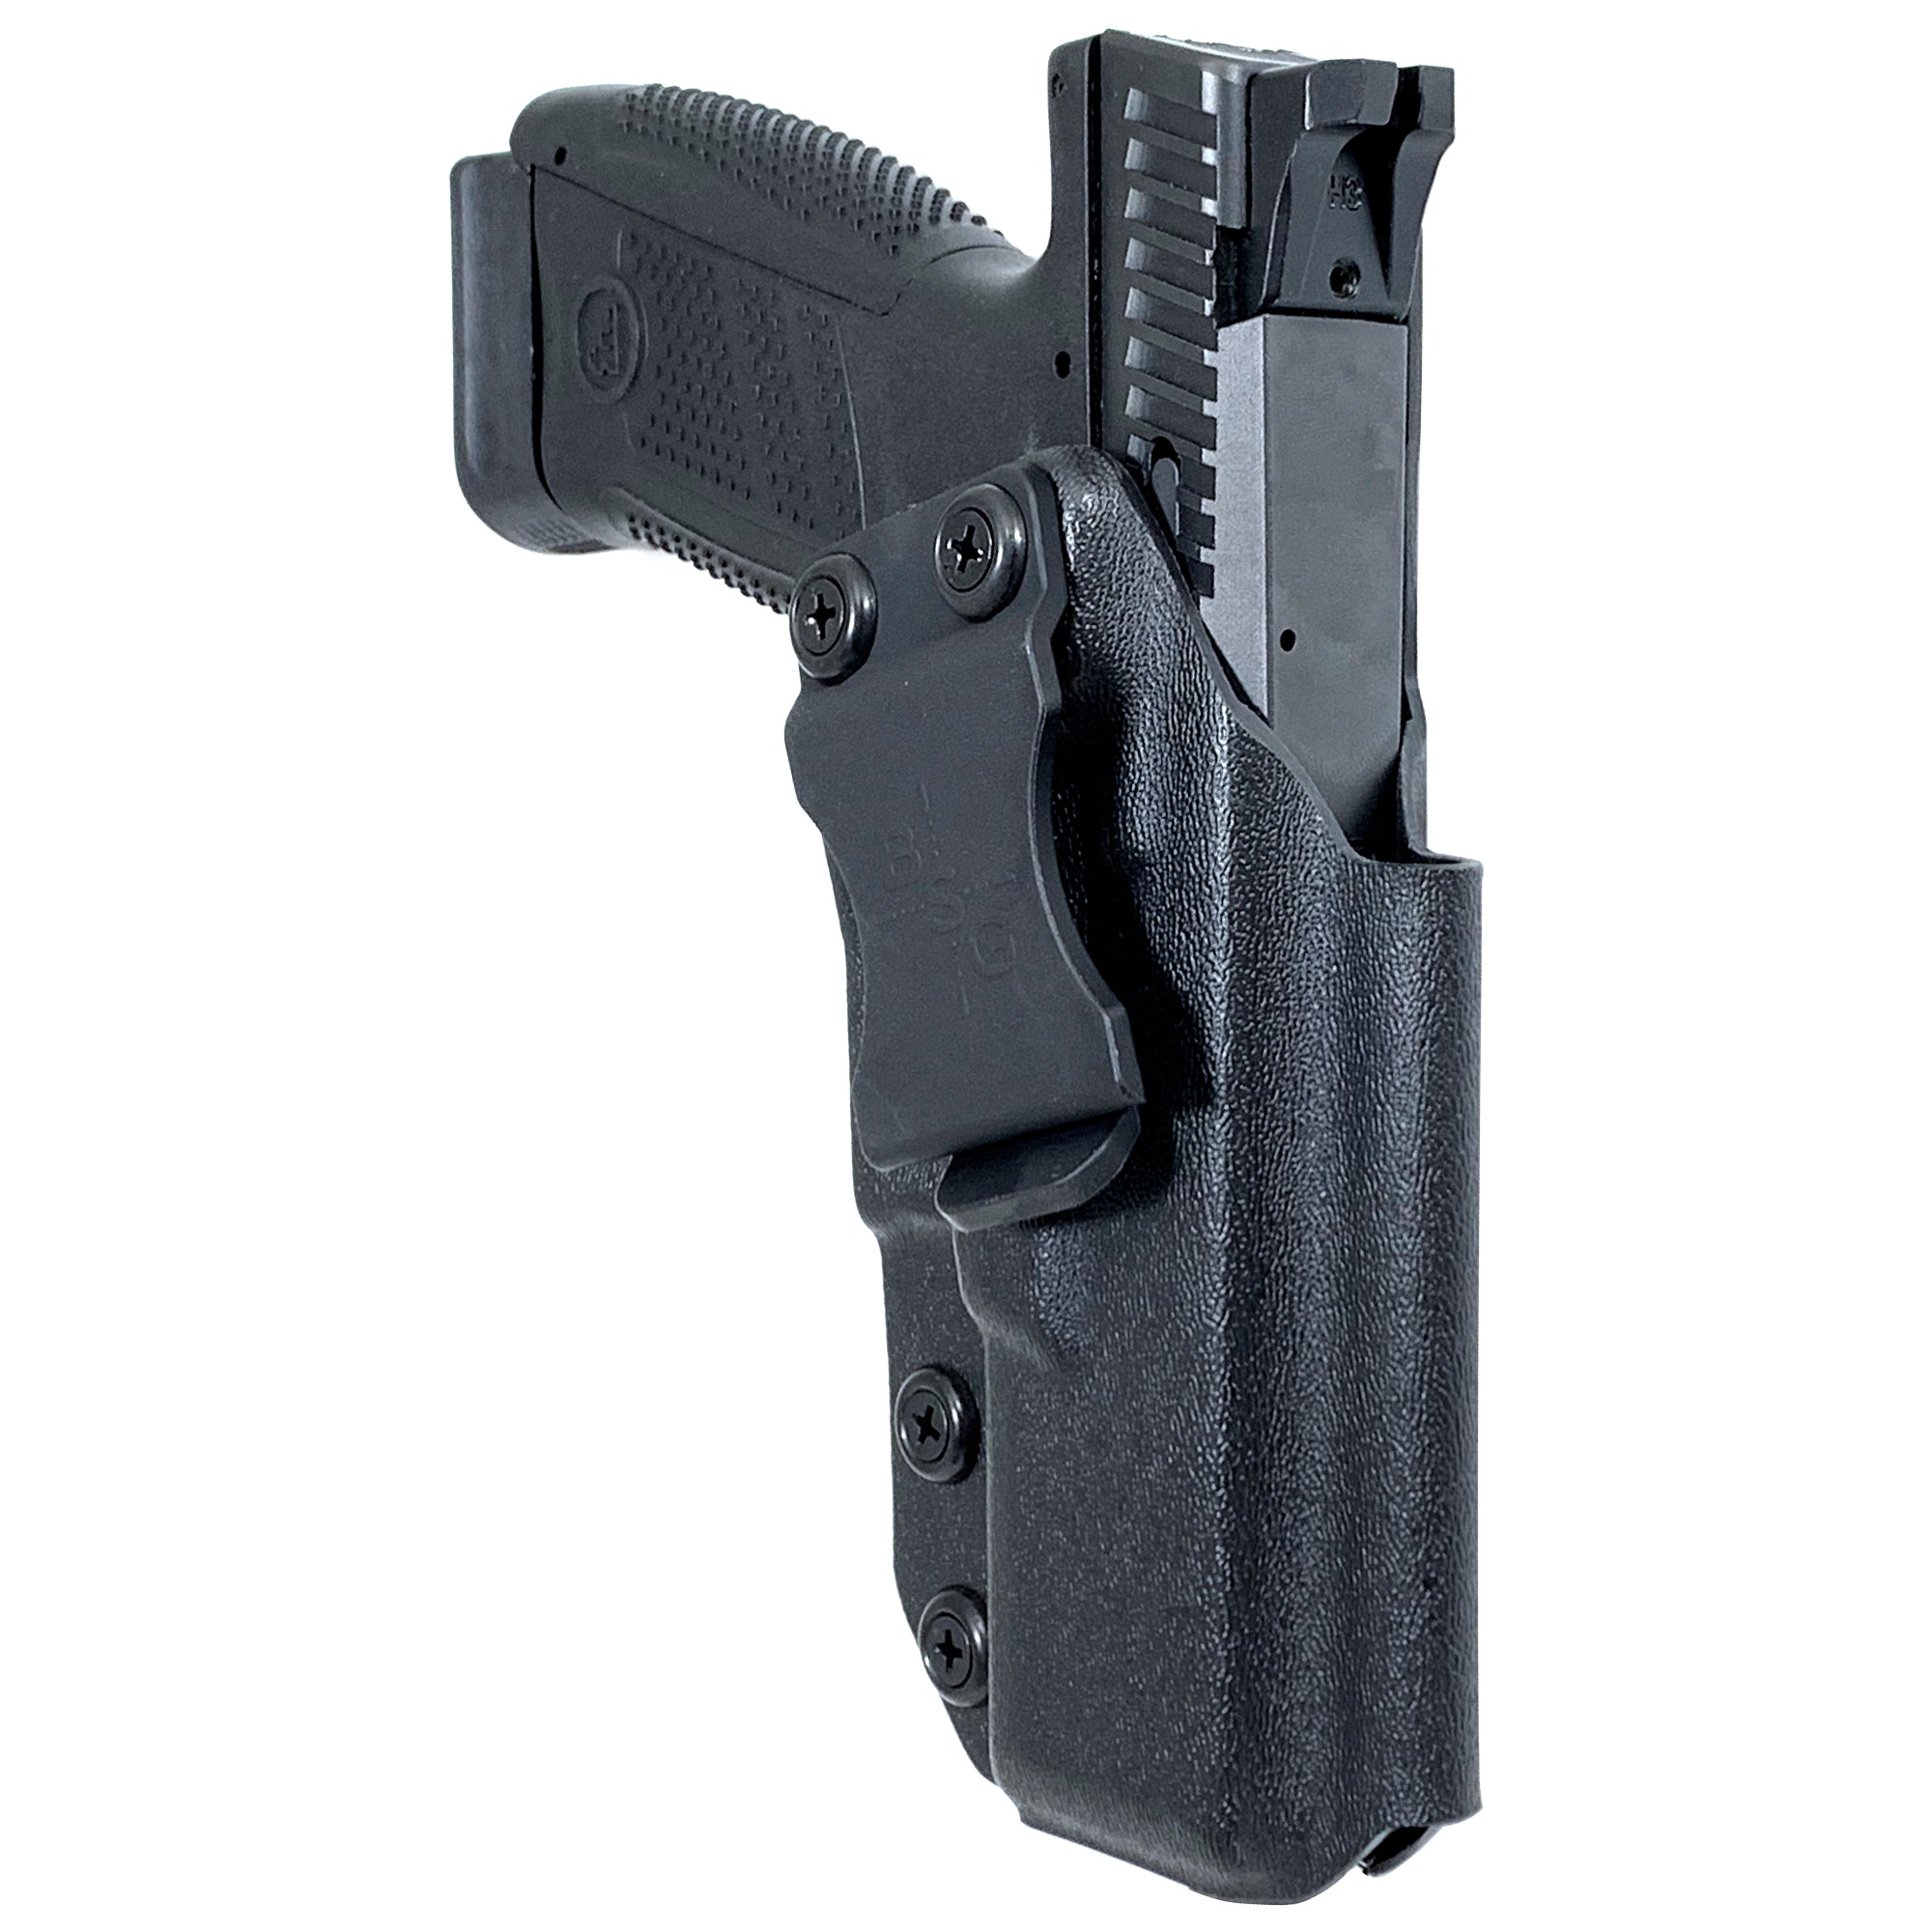 CZ P-10C IWB Sweat Guard Holster & Mag Pouch Combo